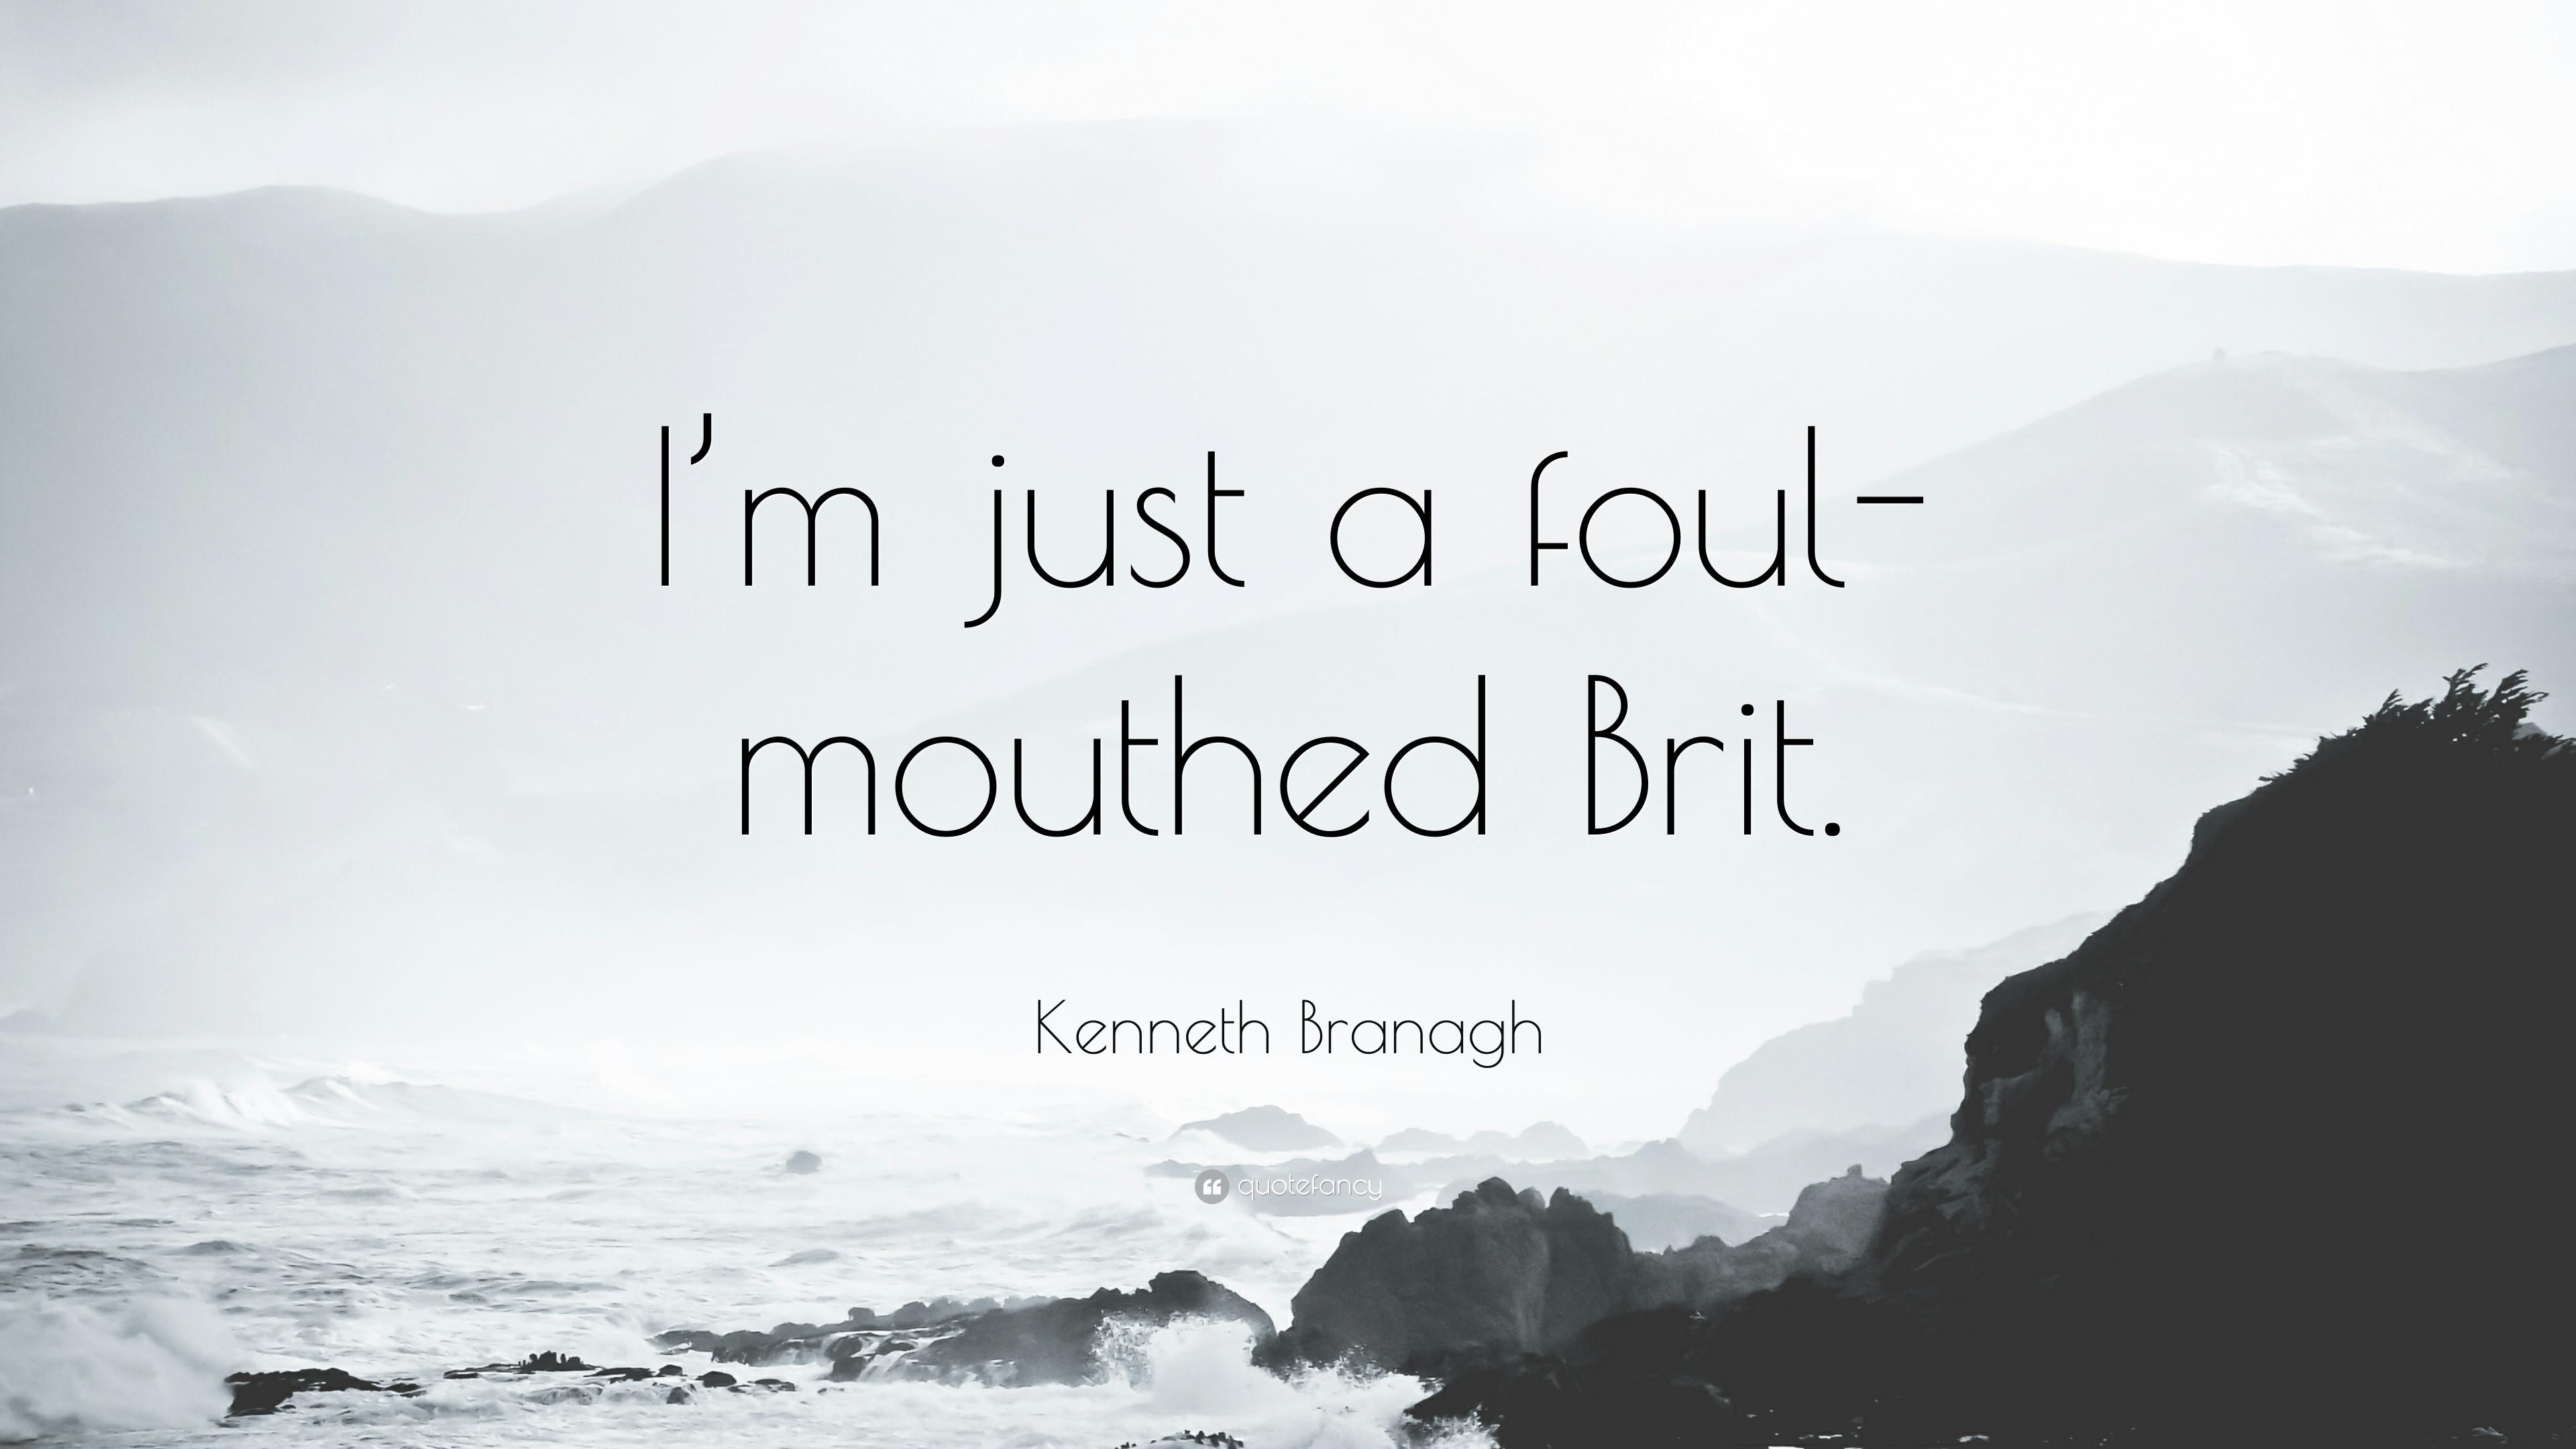 Kenneth Branagh Quote: “I'm just a foul